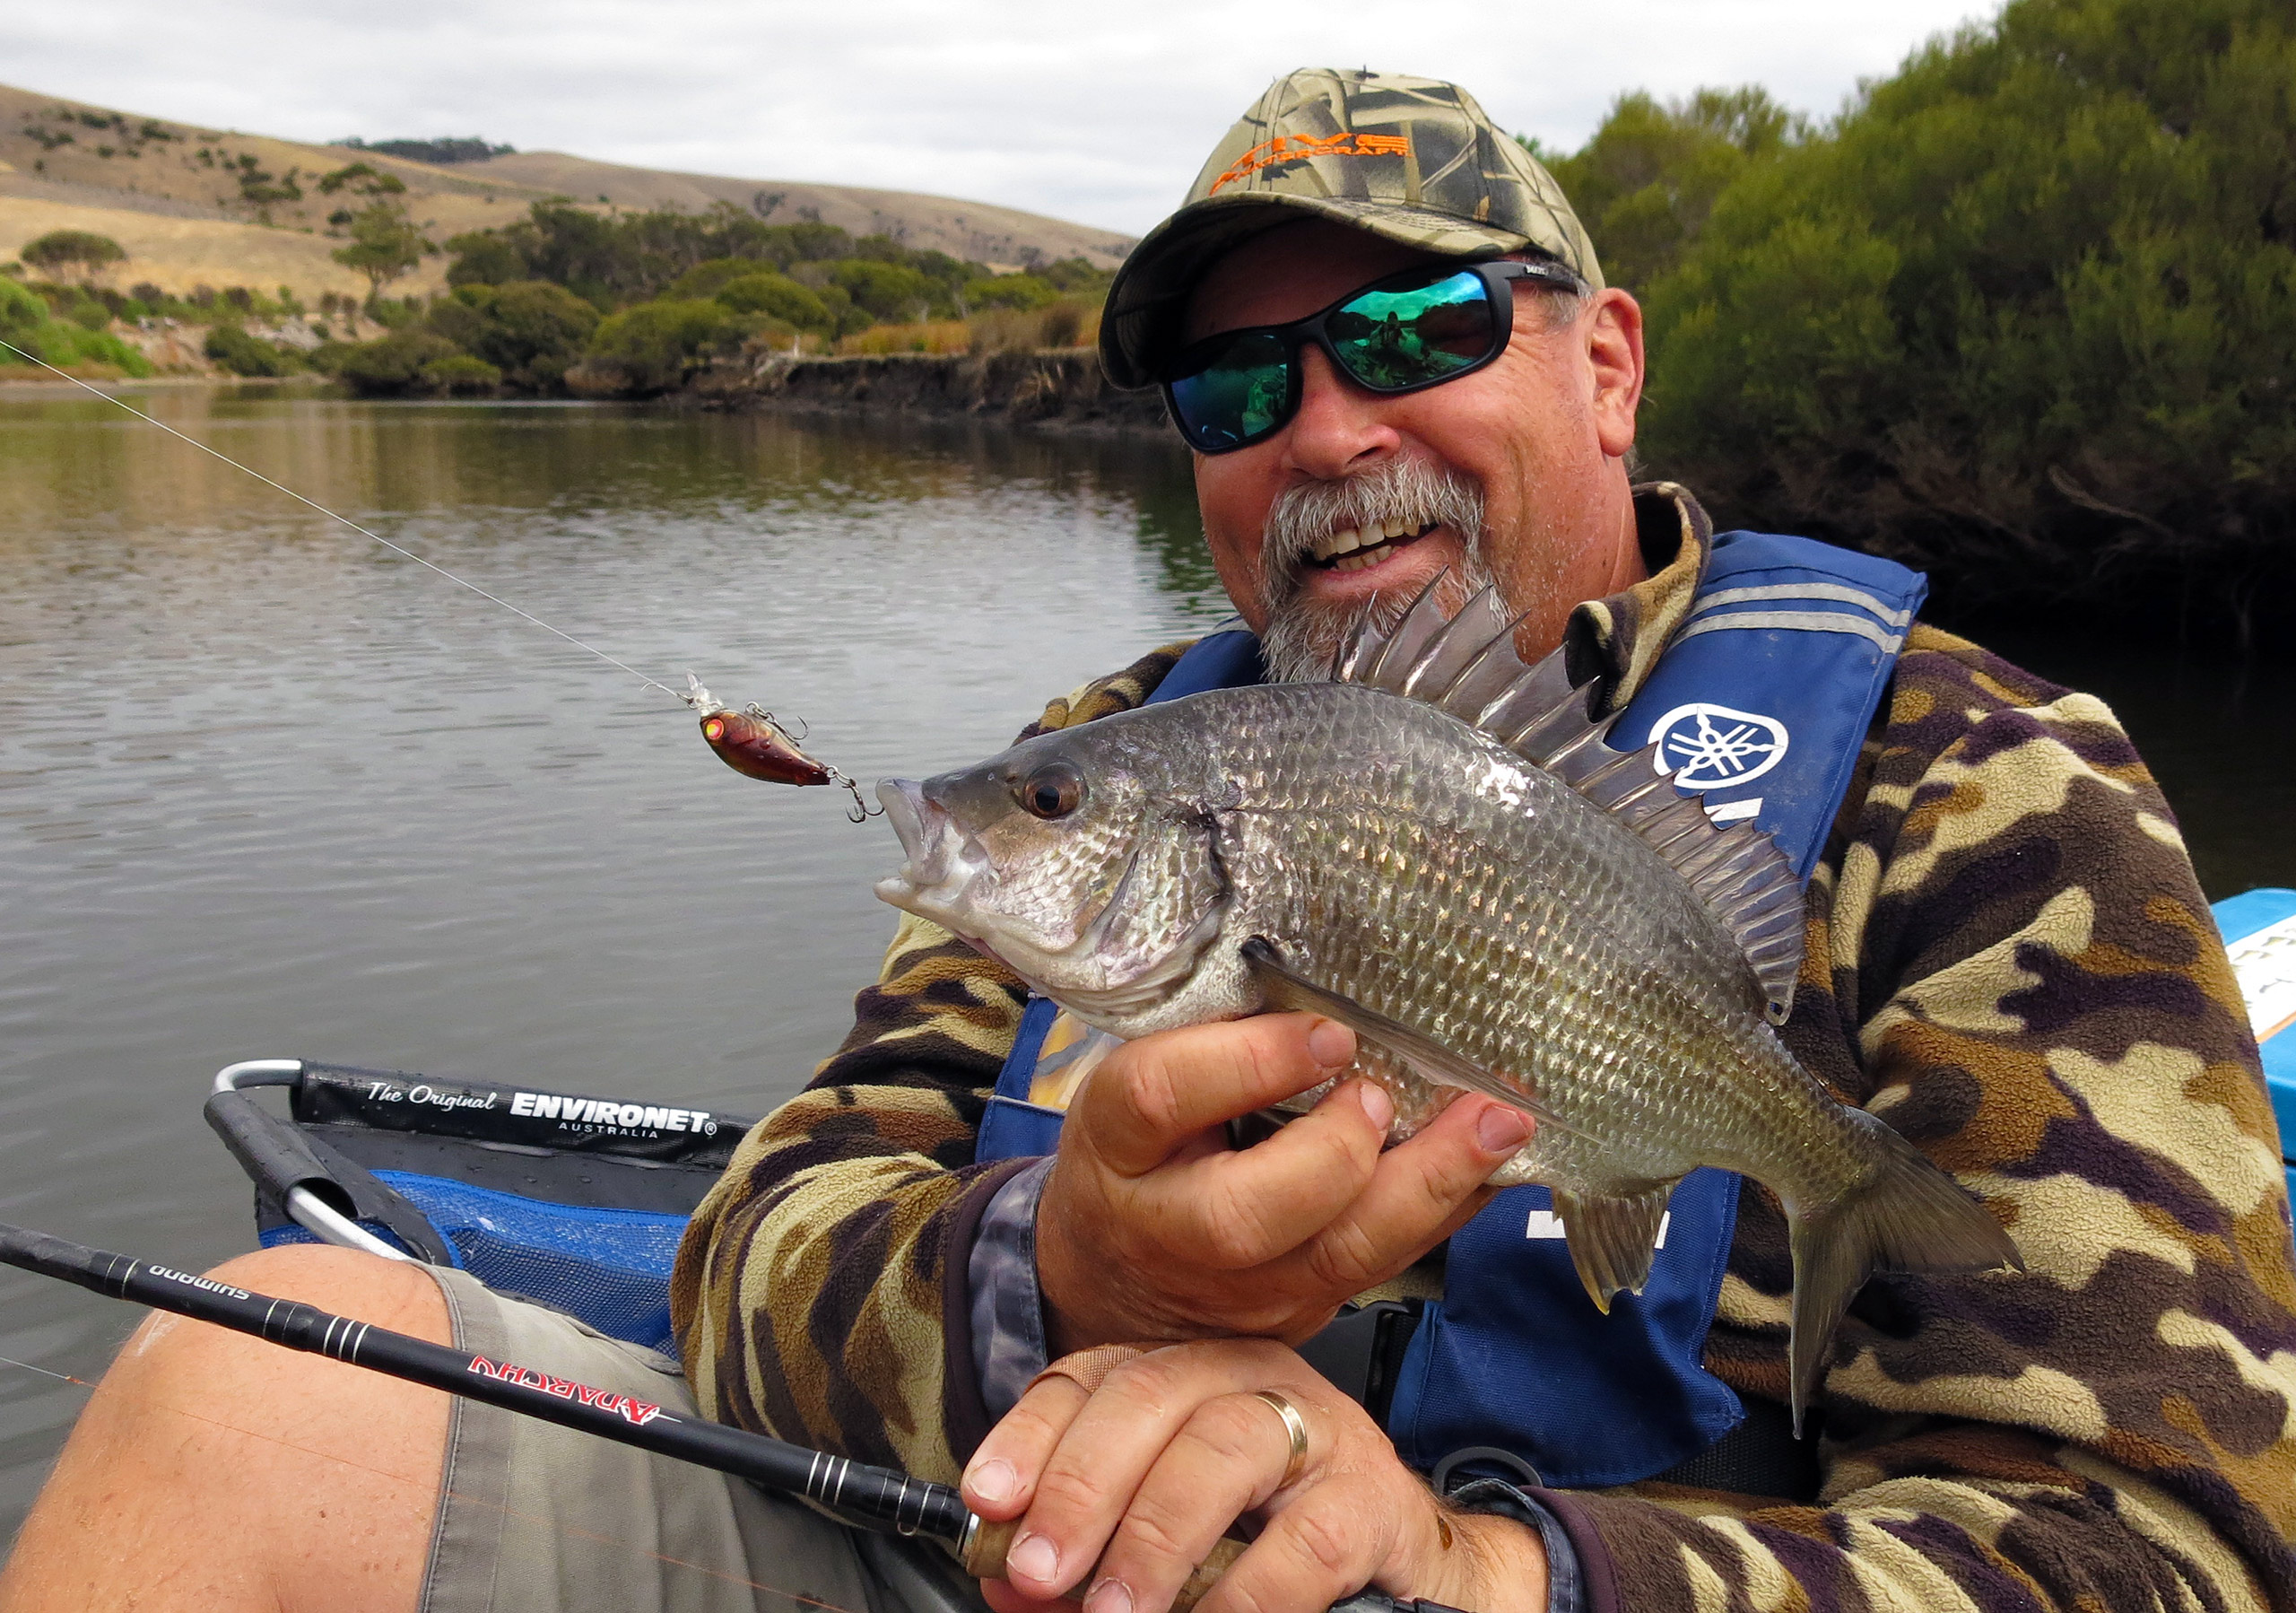 Another feisty bream from the Chapman River. They love small, hard-bodied lures.